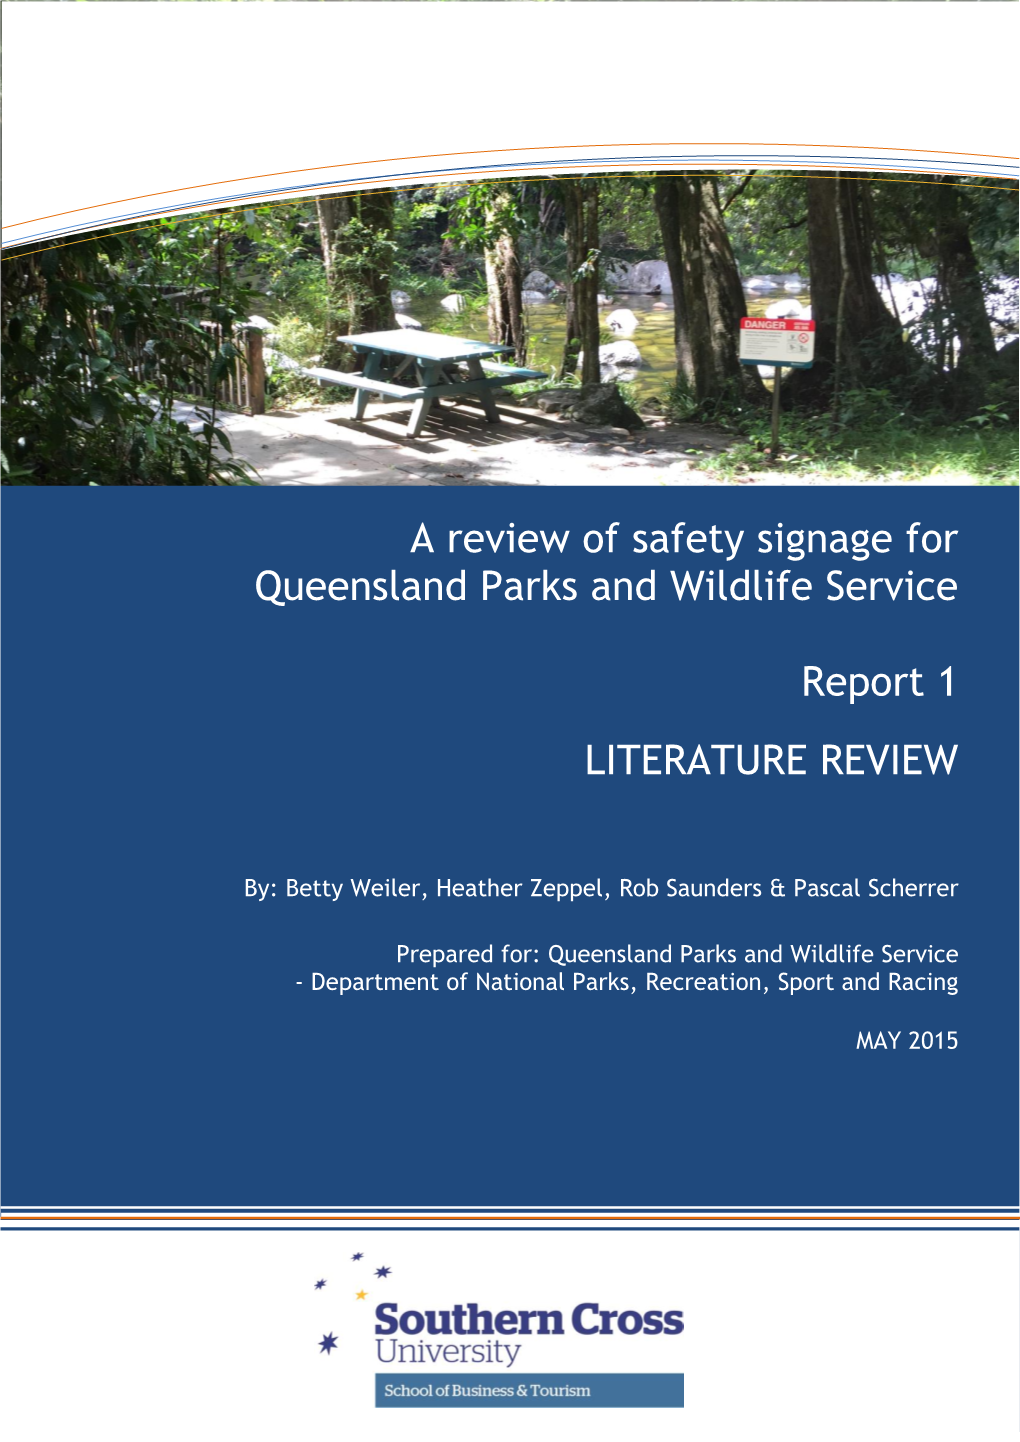 A Review of Safety Signage for Queensland Parks and Wildlife Service